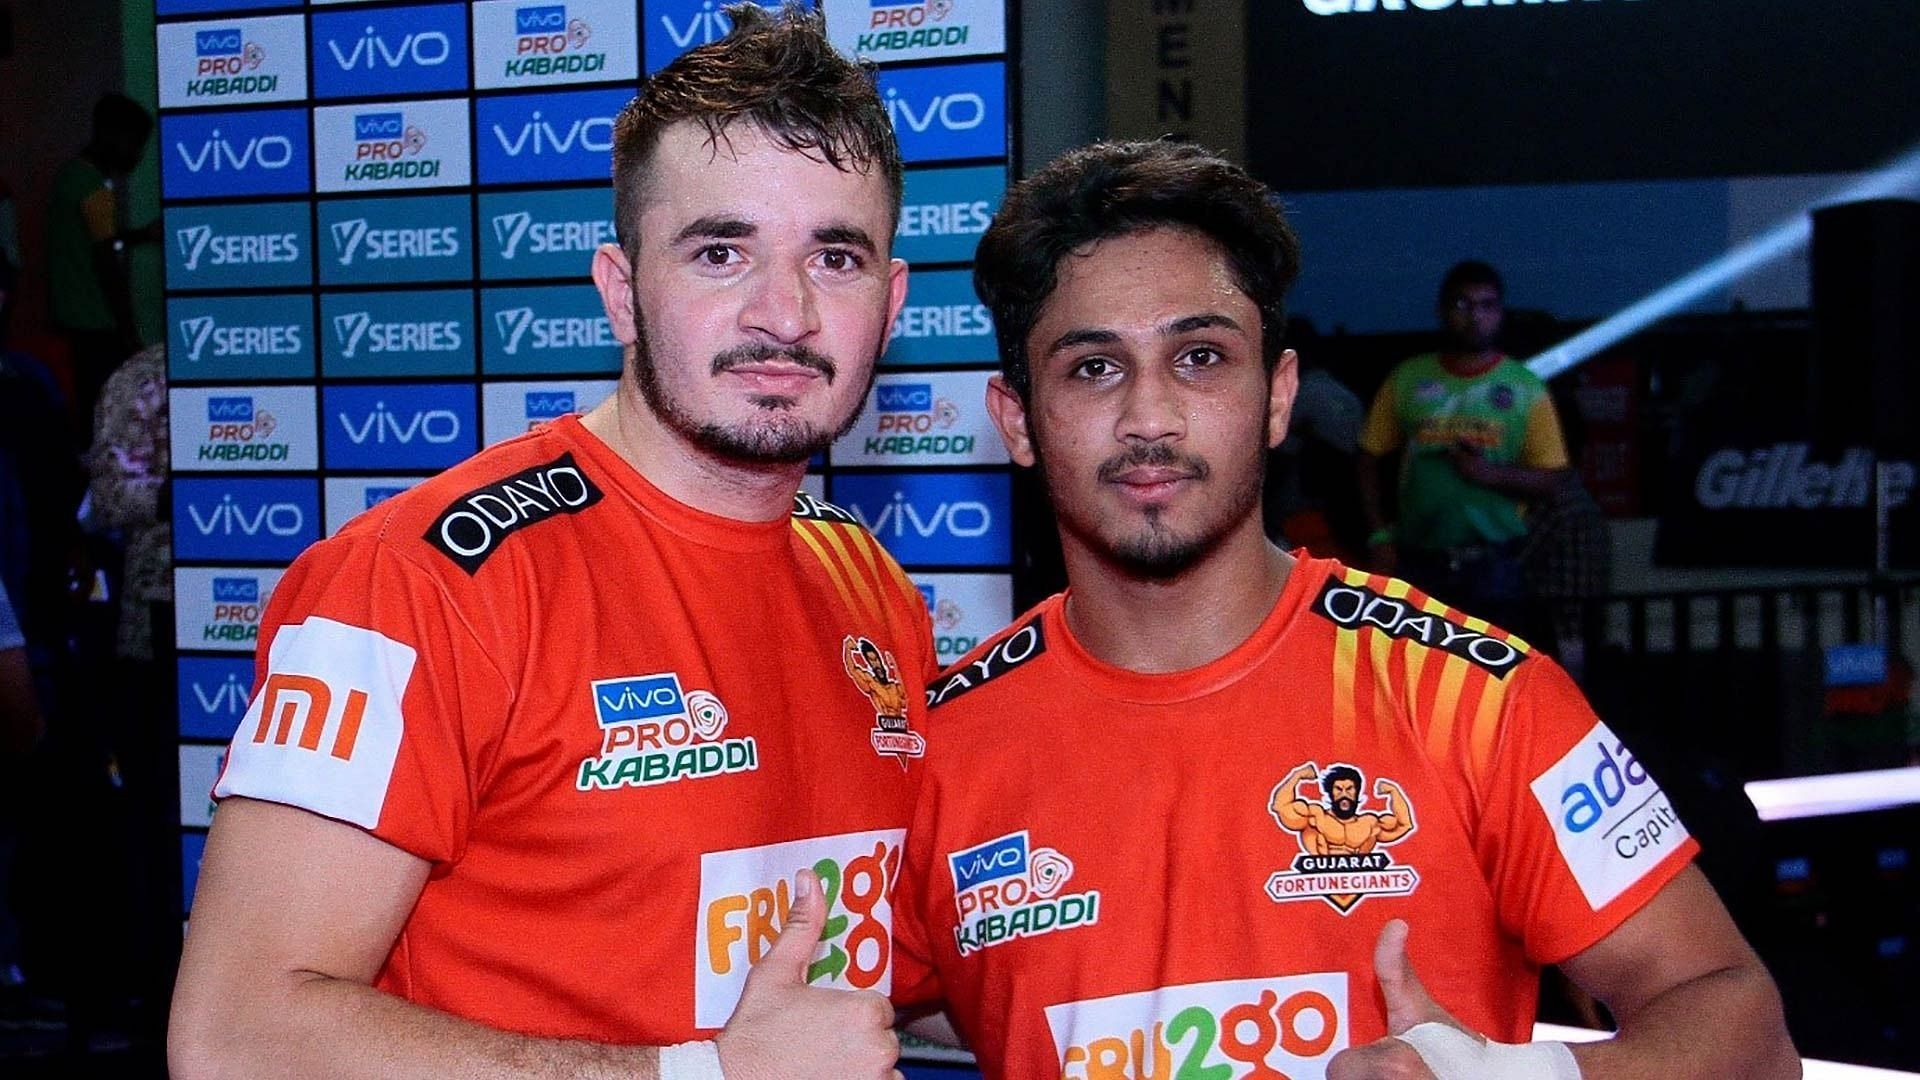 A couple of Gujarat Fortune Giants players pose for a photo - Image Courtesy: PKL